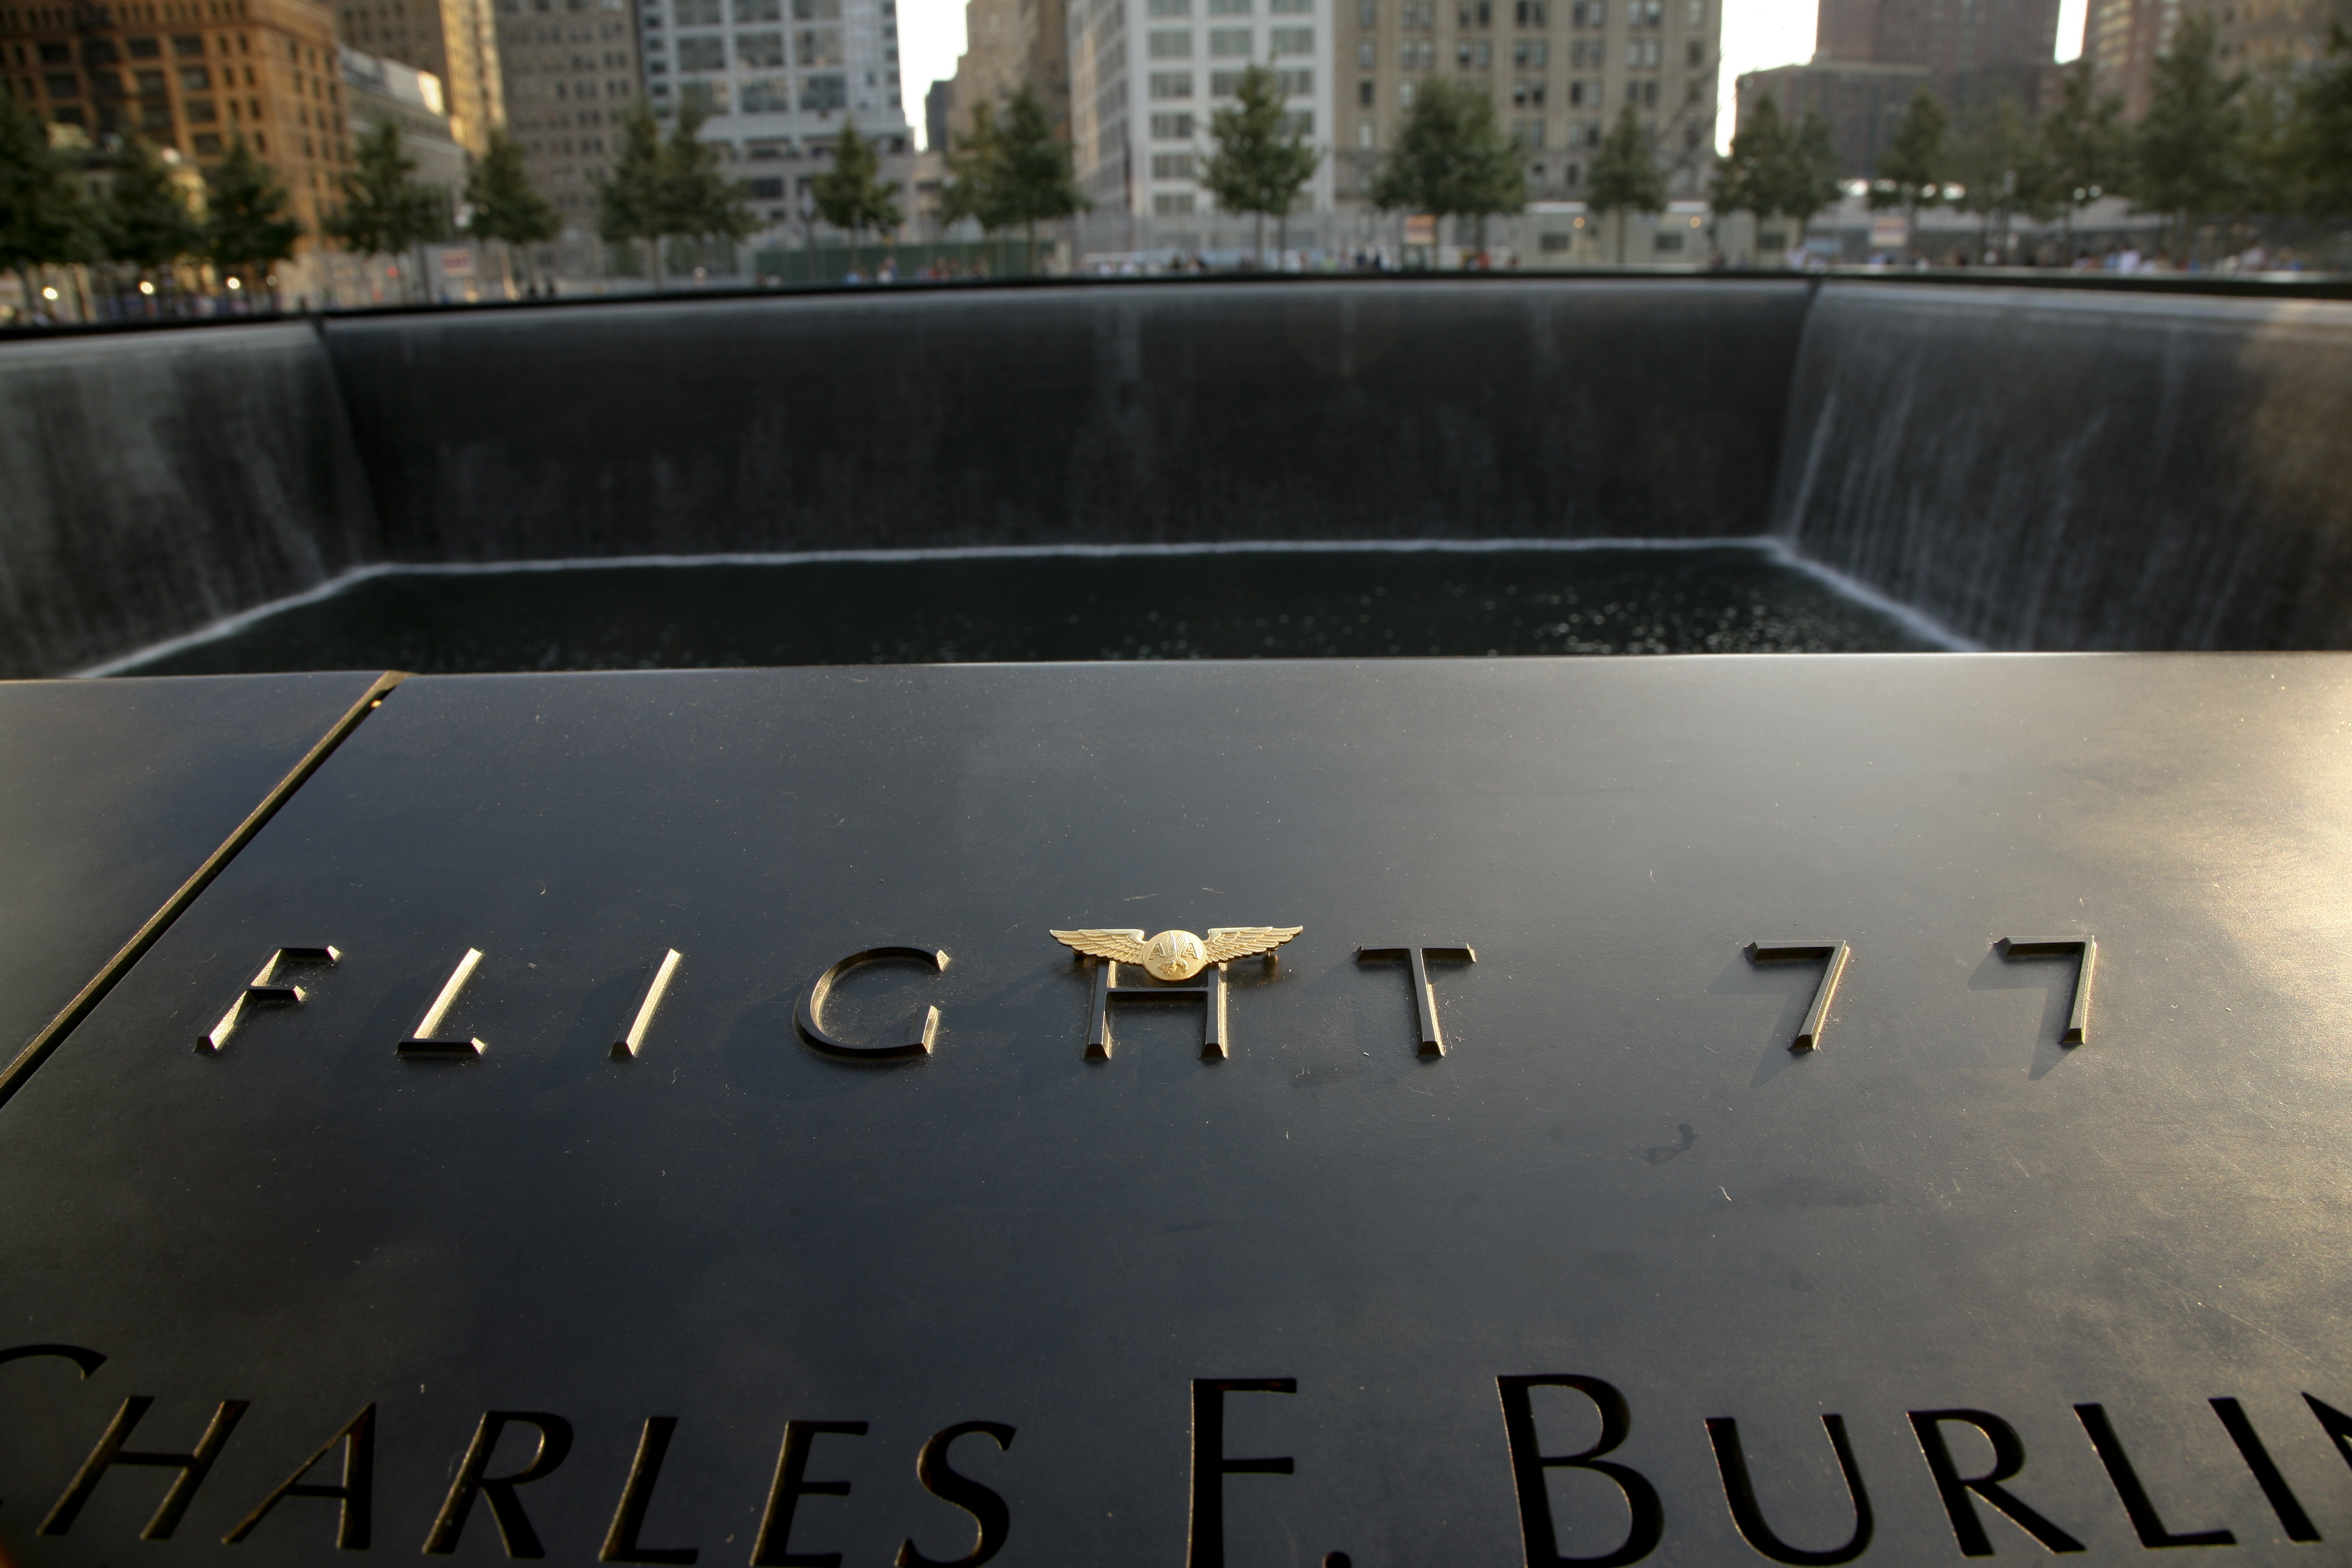 Pilot wings have been placed at the section of the 9/11 Memorial paying tribute to the victims of Flight 77. The reflecting pool is in the background.